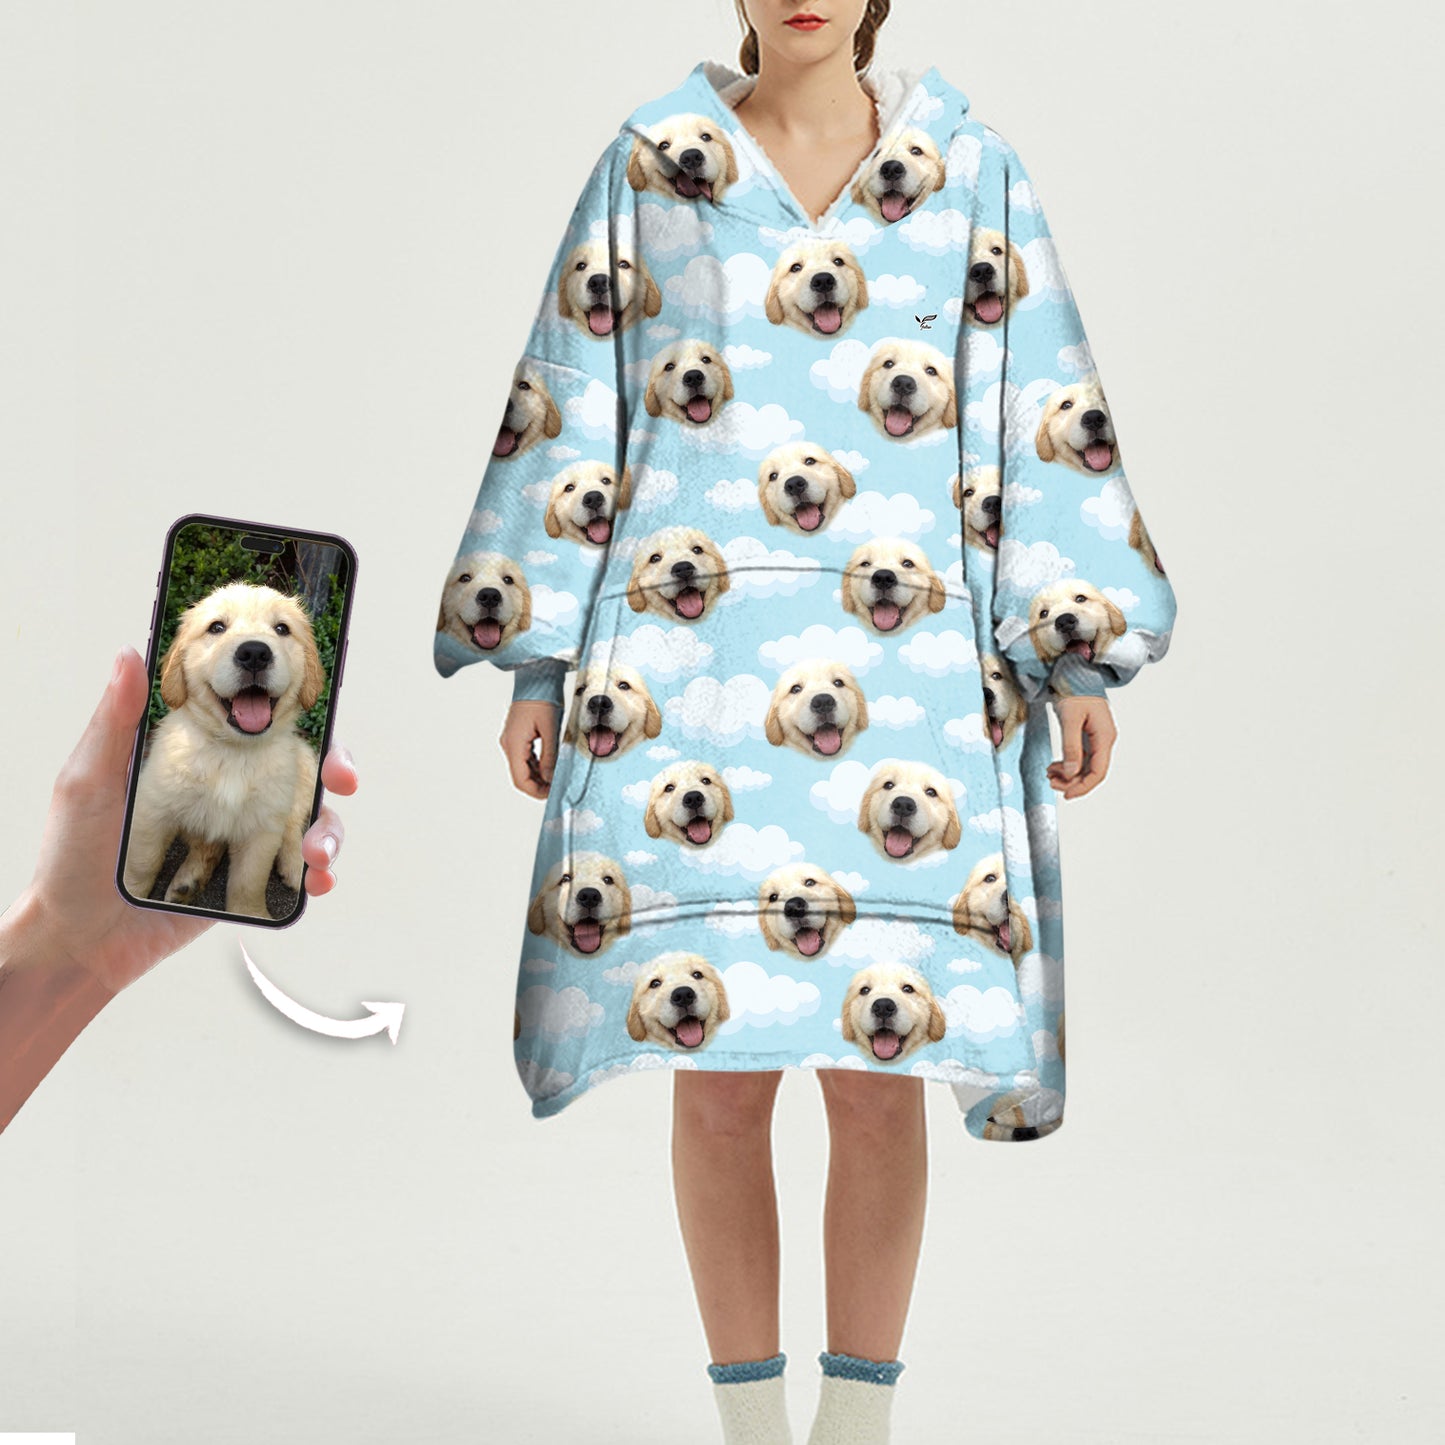 I Love Clouds - Personalized Blanket Hoodie With Your Pet's Photo